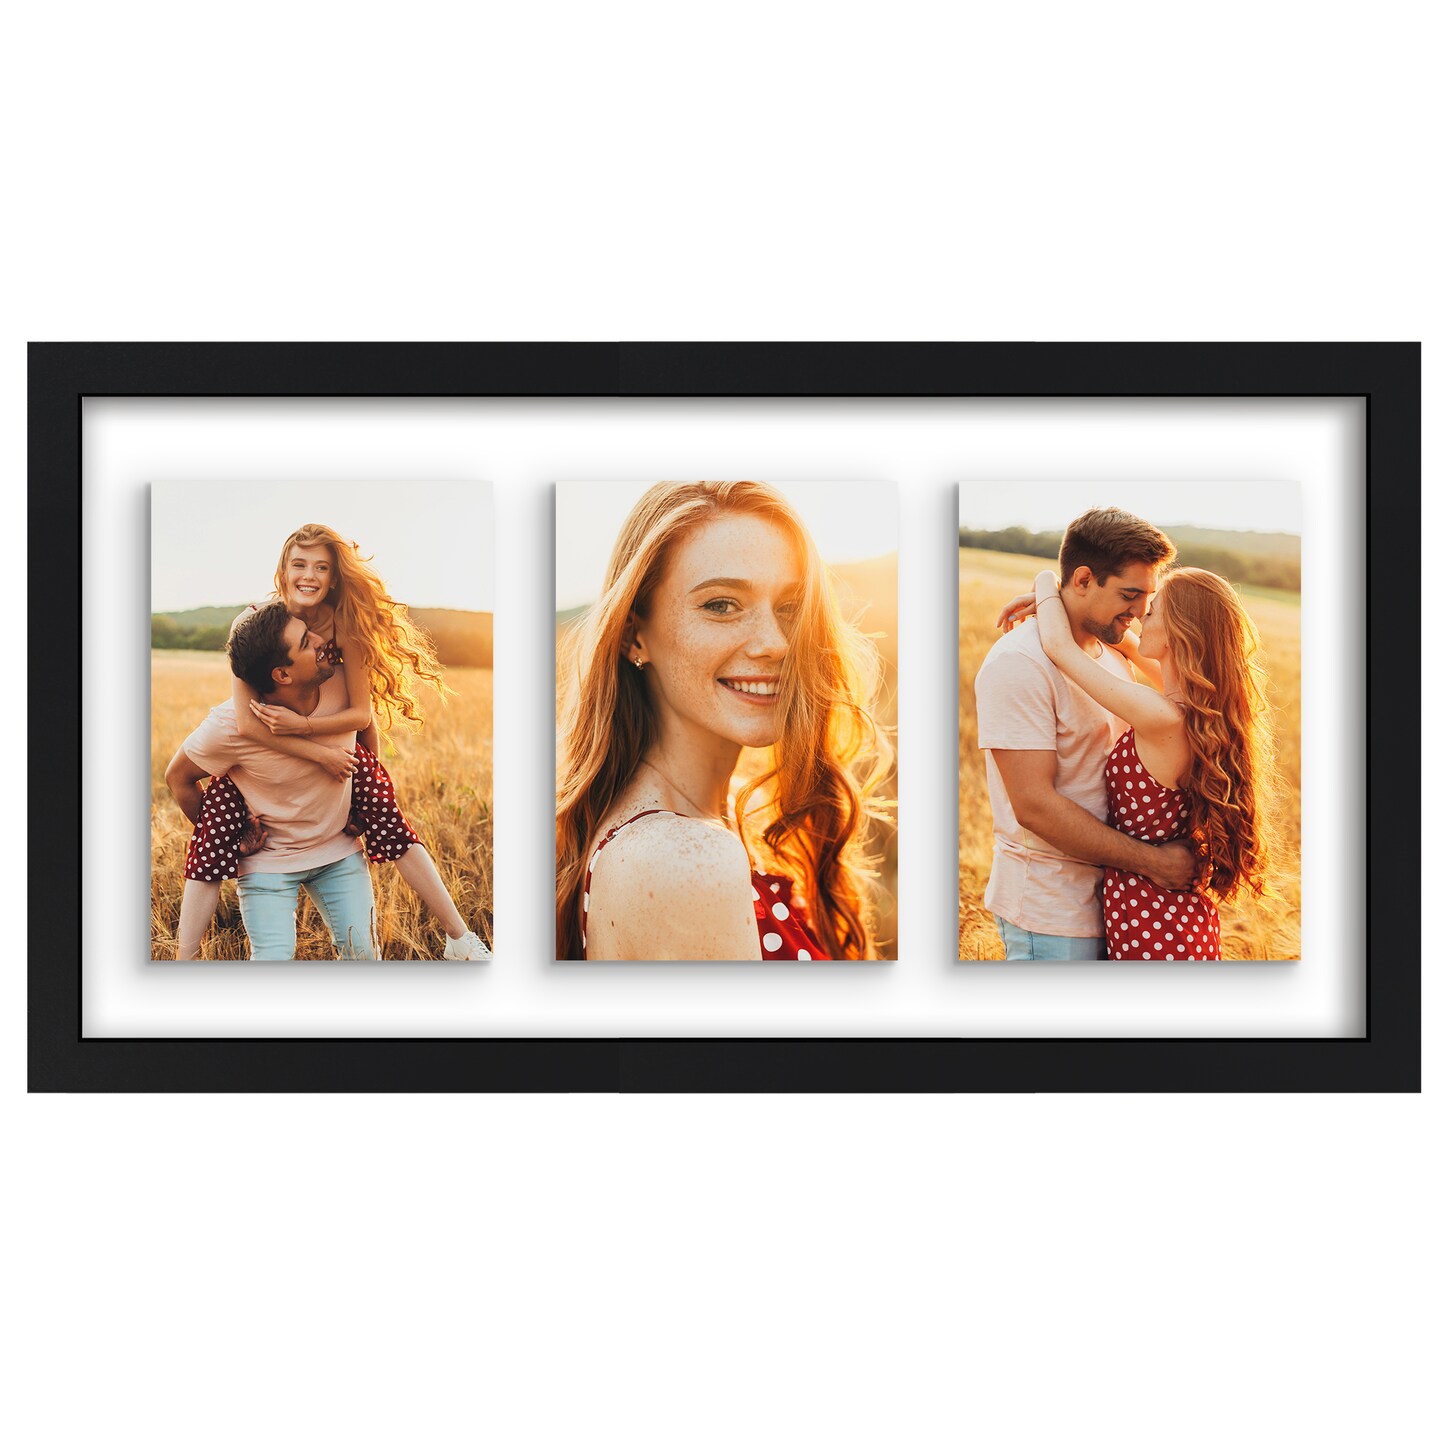 Americanflat Floating Collage Frame - Displays Three Photos with Floating Effect - Shatter Resistant Glass - Hanging Hardware for Horizontal or Verticle Display